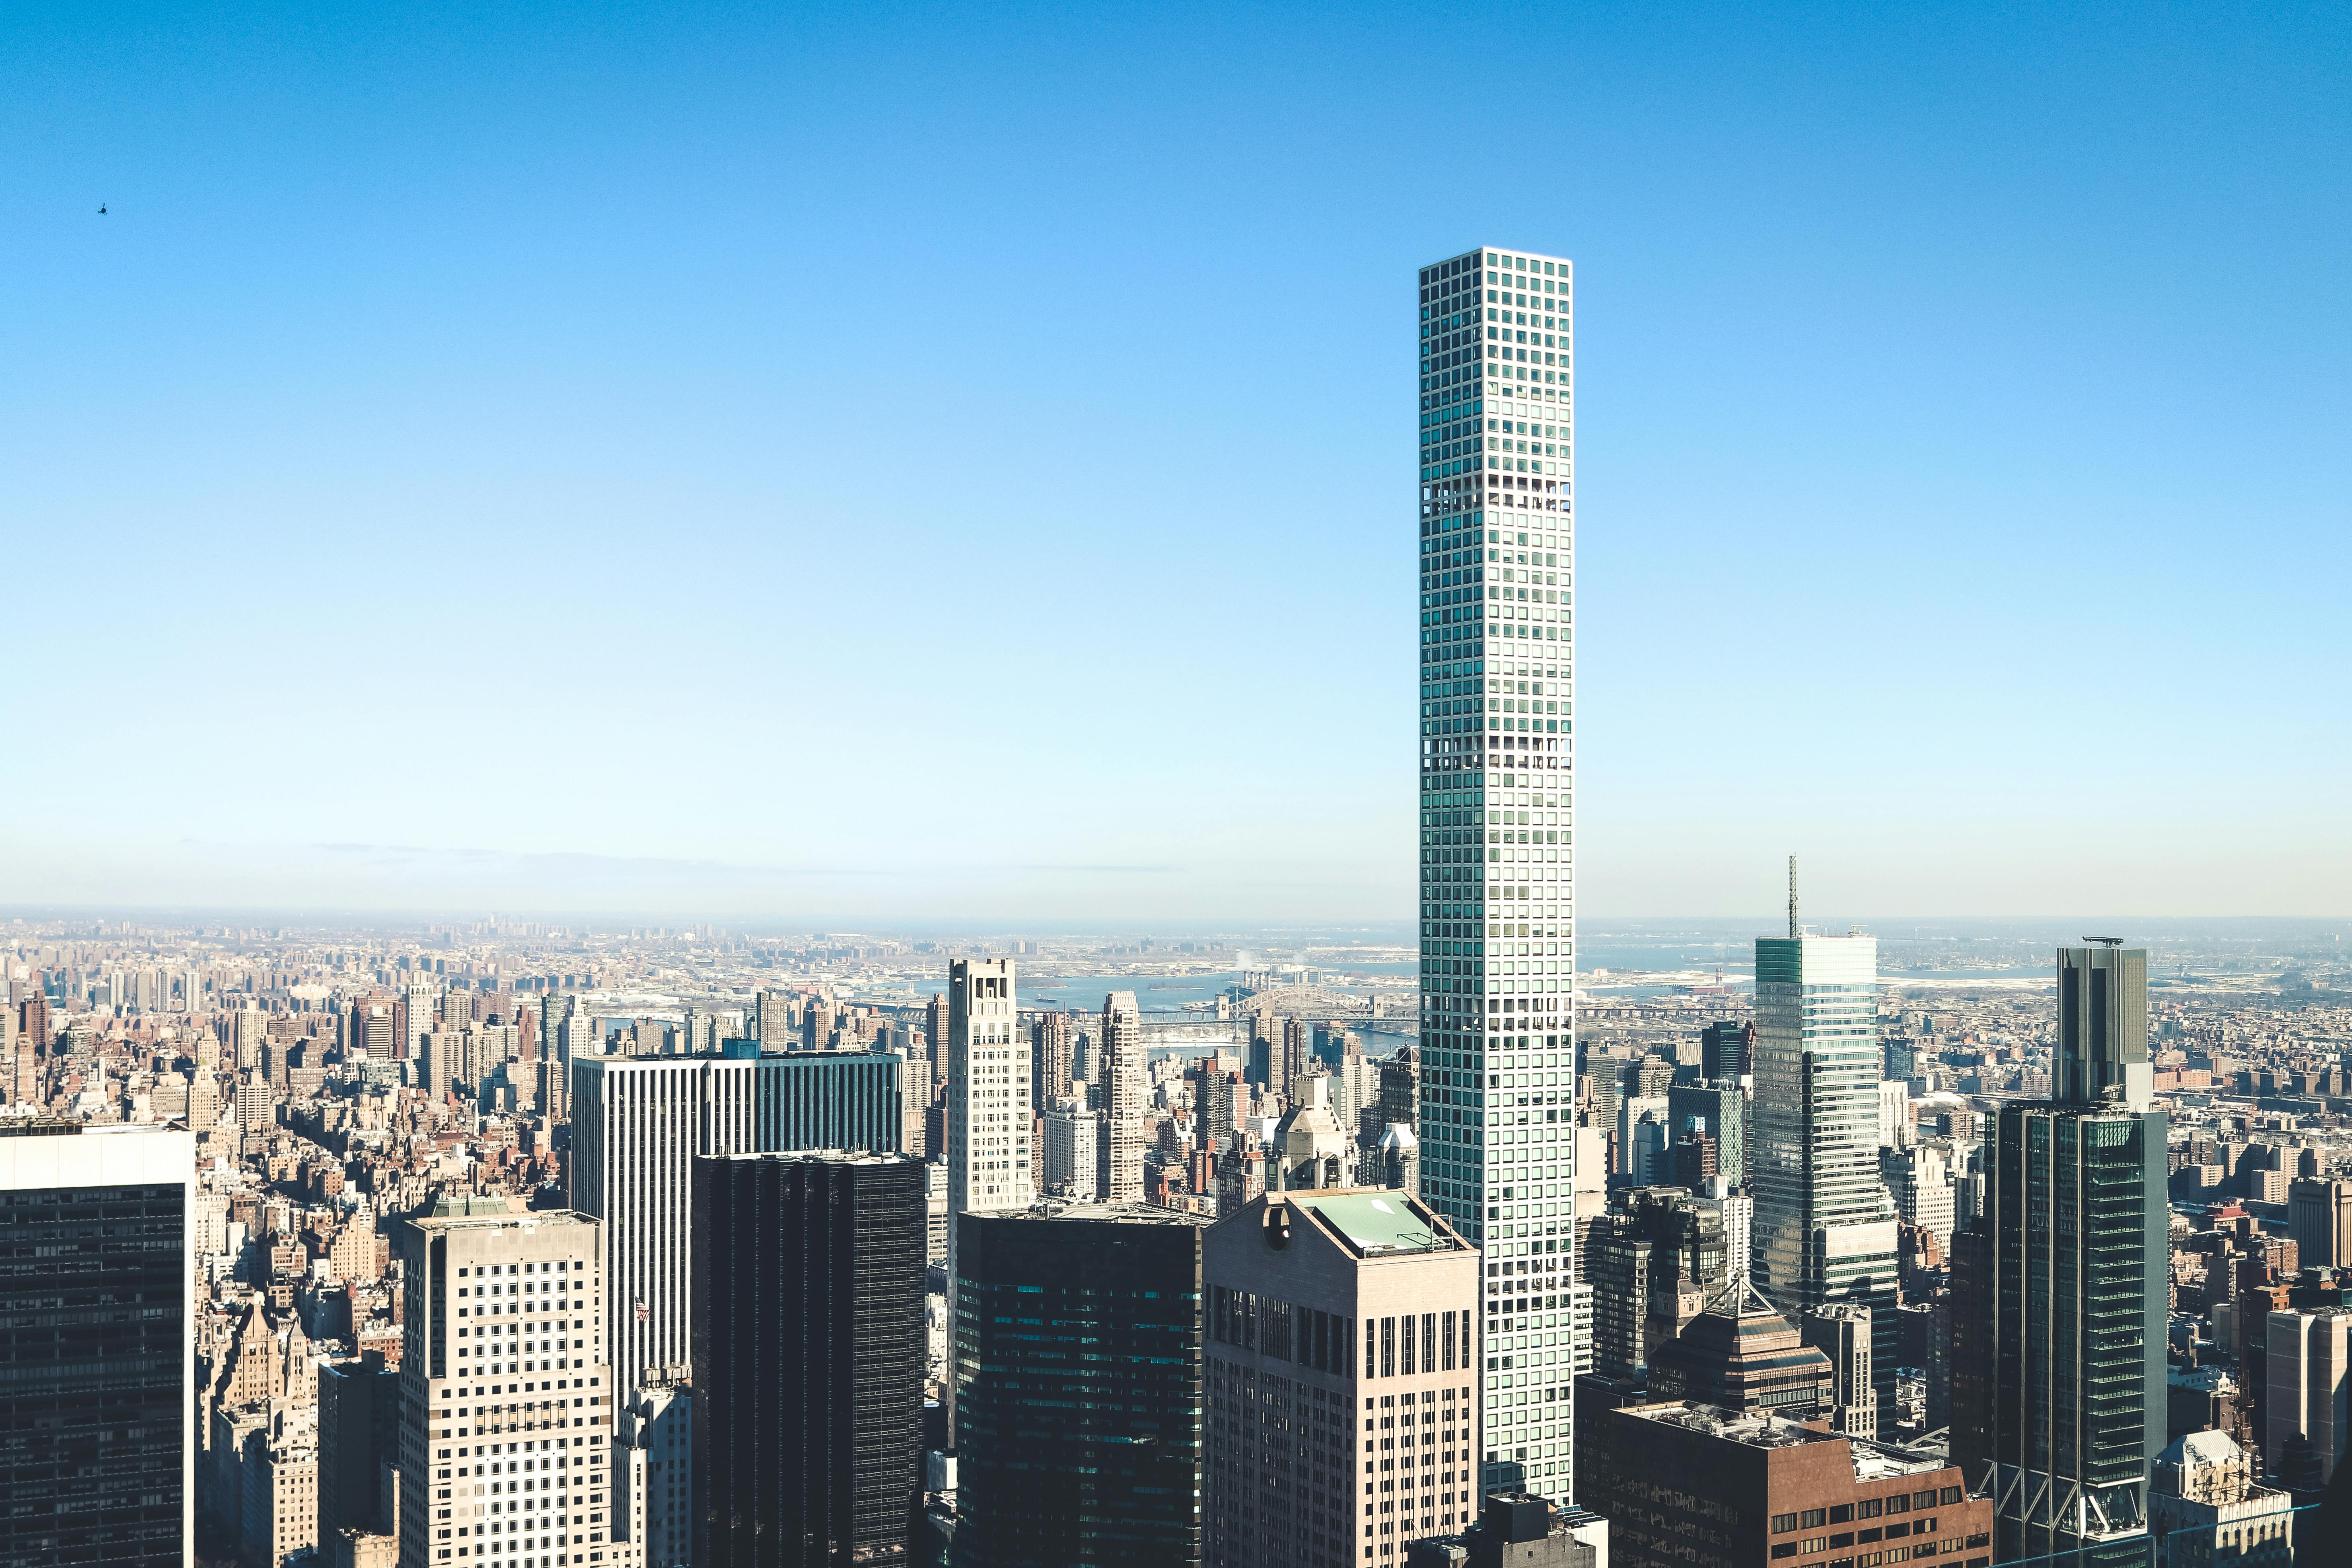 432 park avenue over buildings in new york